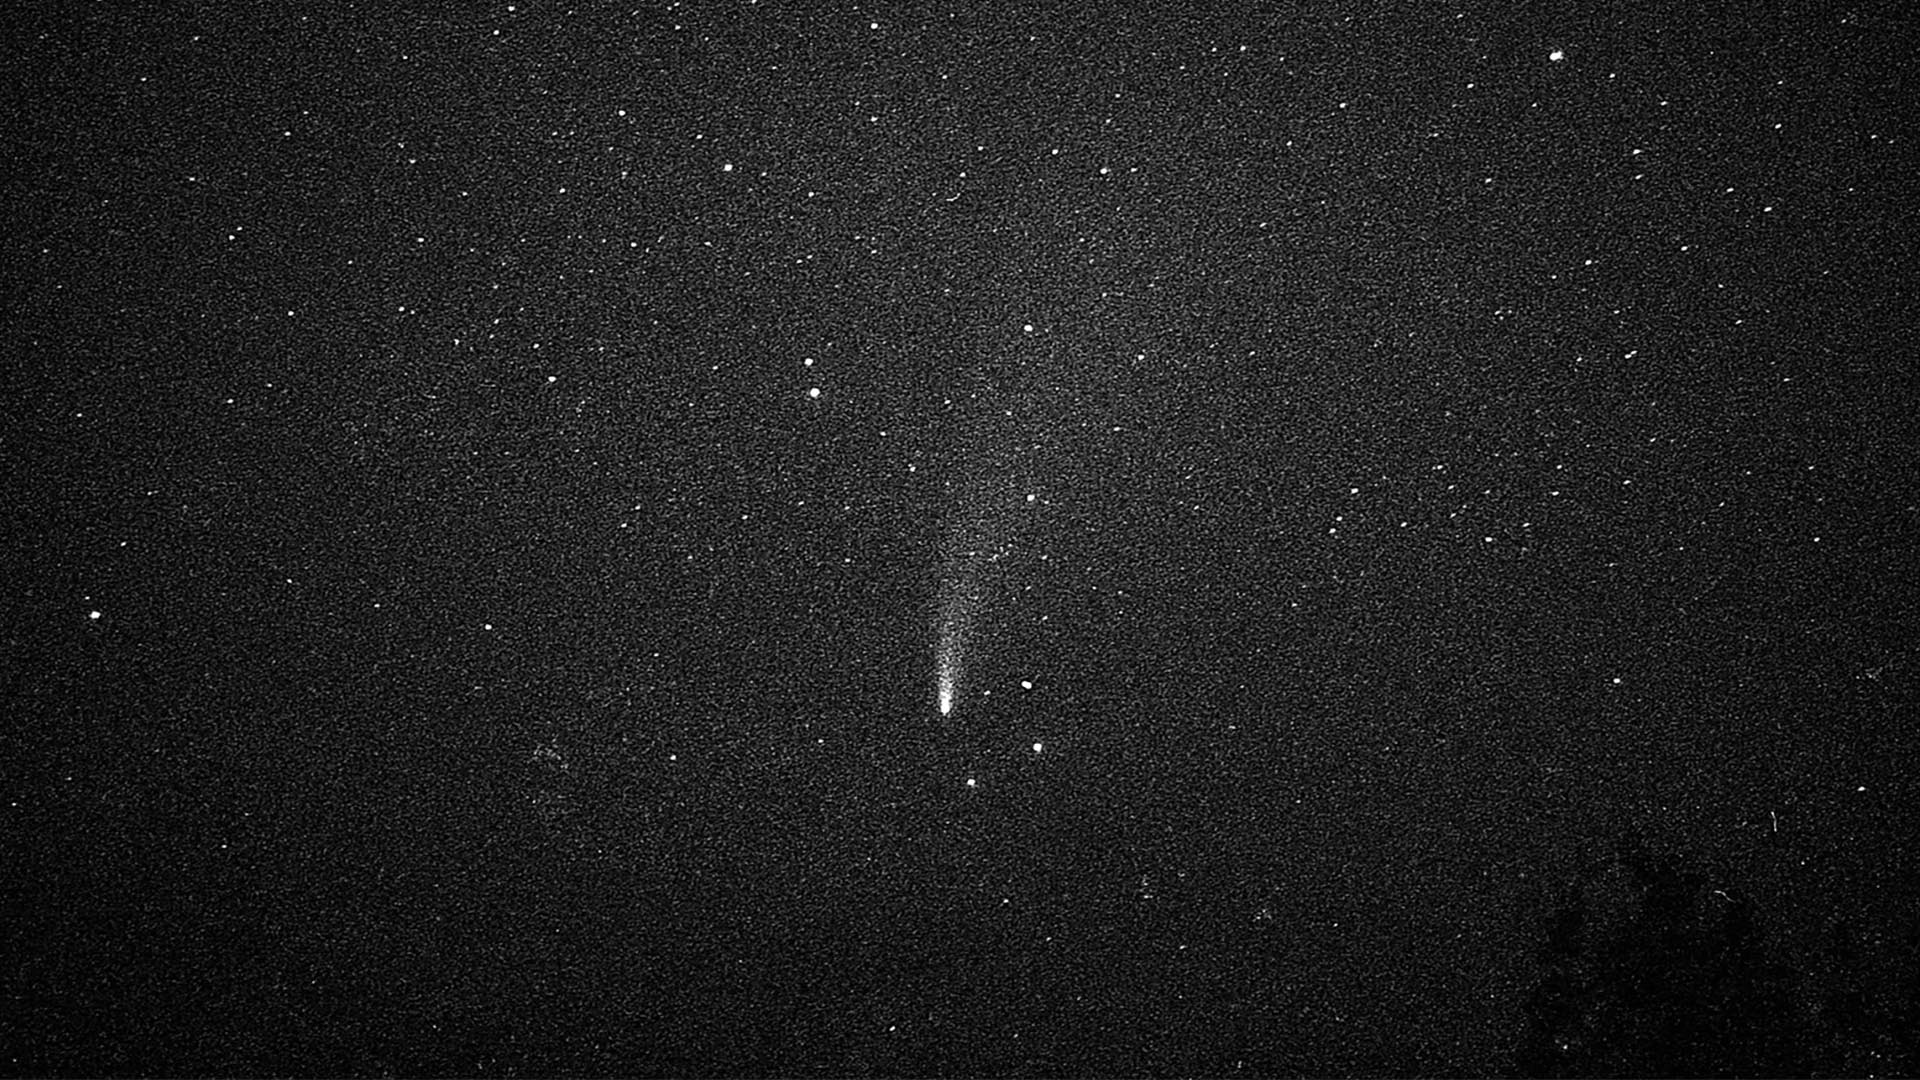 An image of the NEOWISE comet shot on high speed Black and White Film. The technical Data Sheets contain some information that could have helped make this image better.